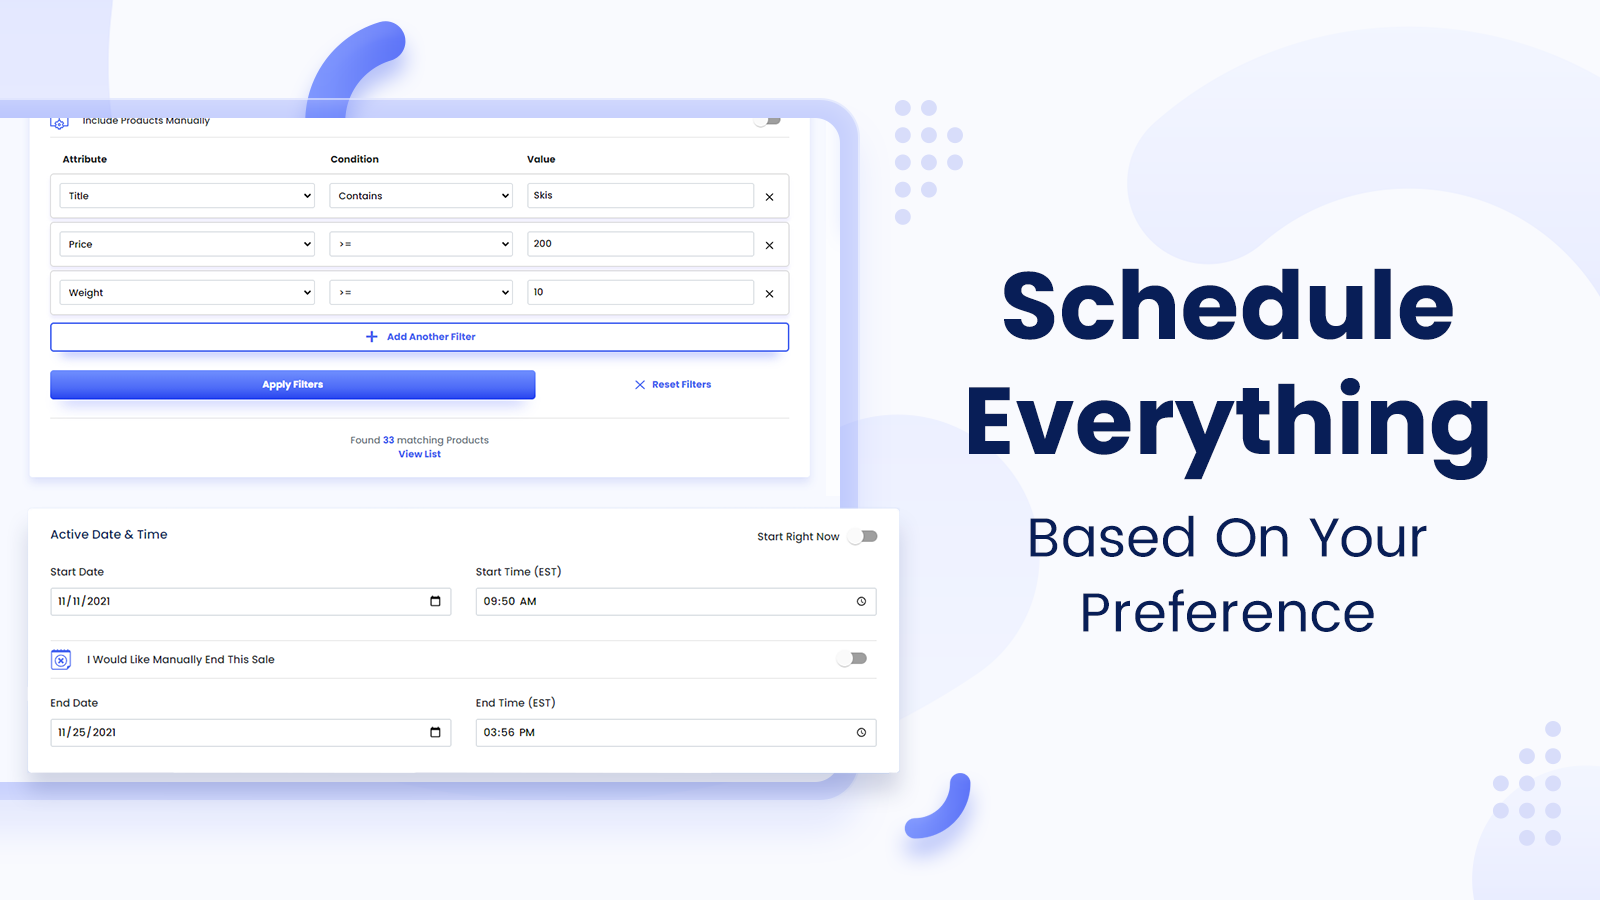 Schedule Everything Based On Your Preference